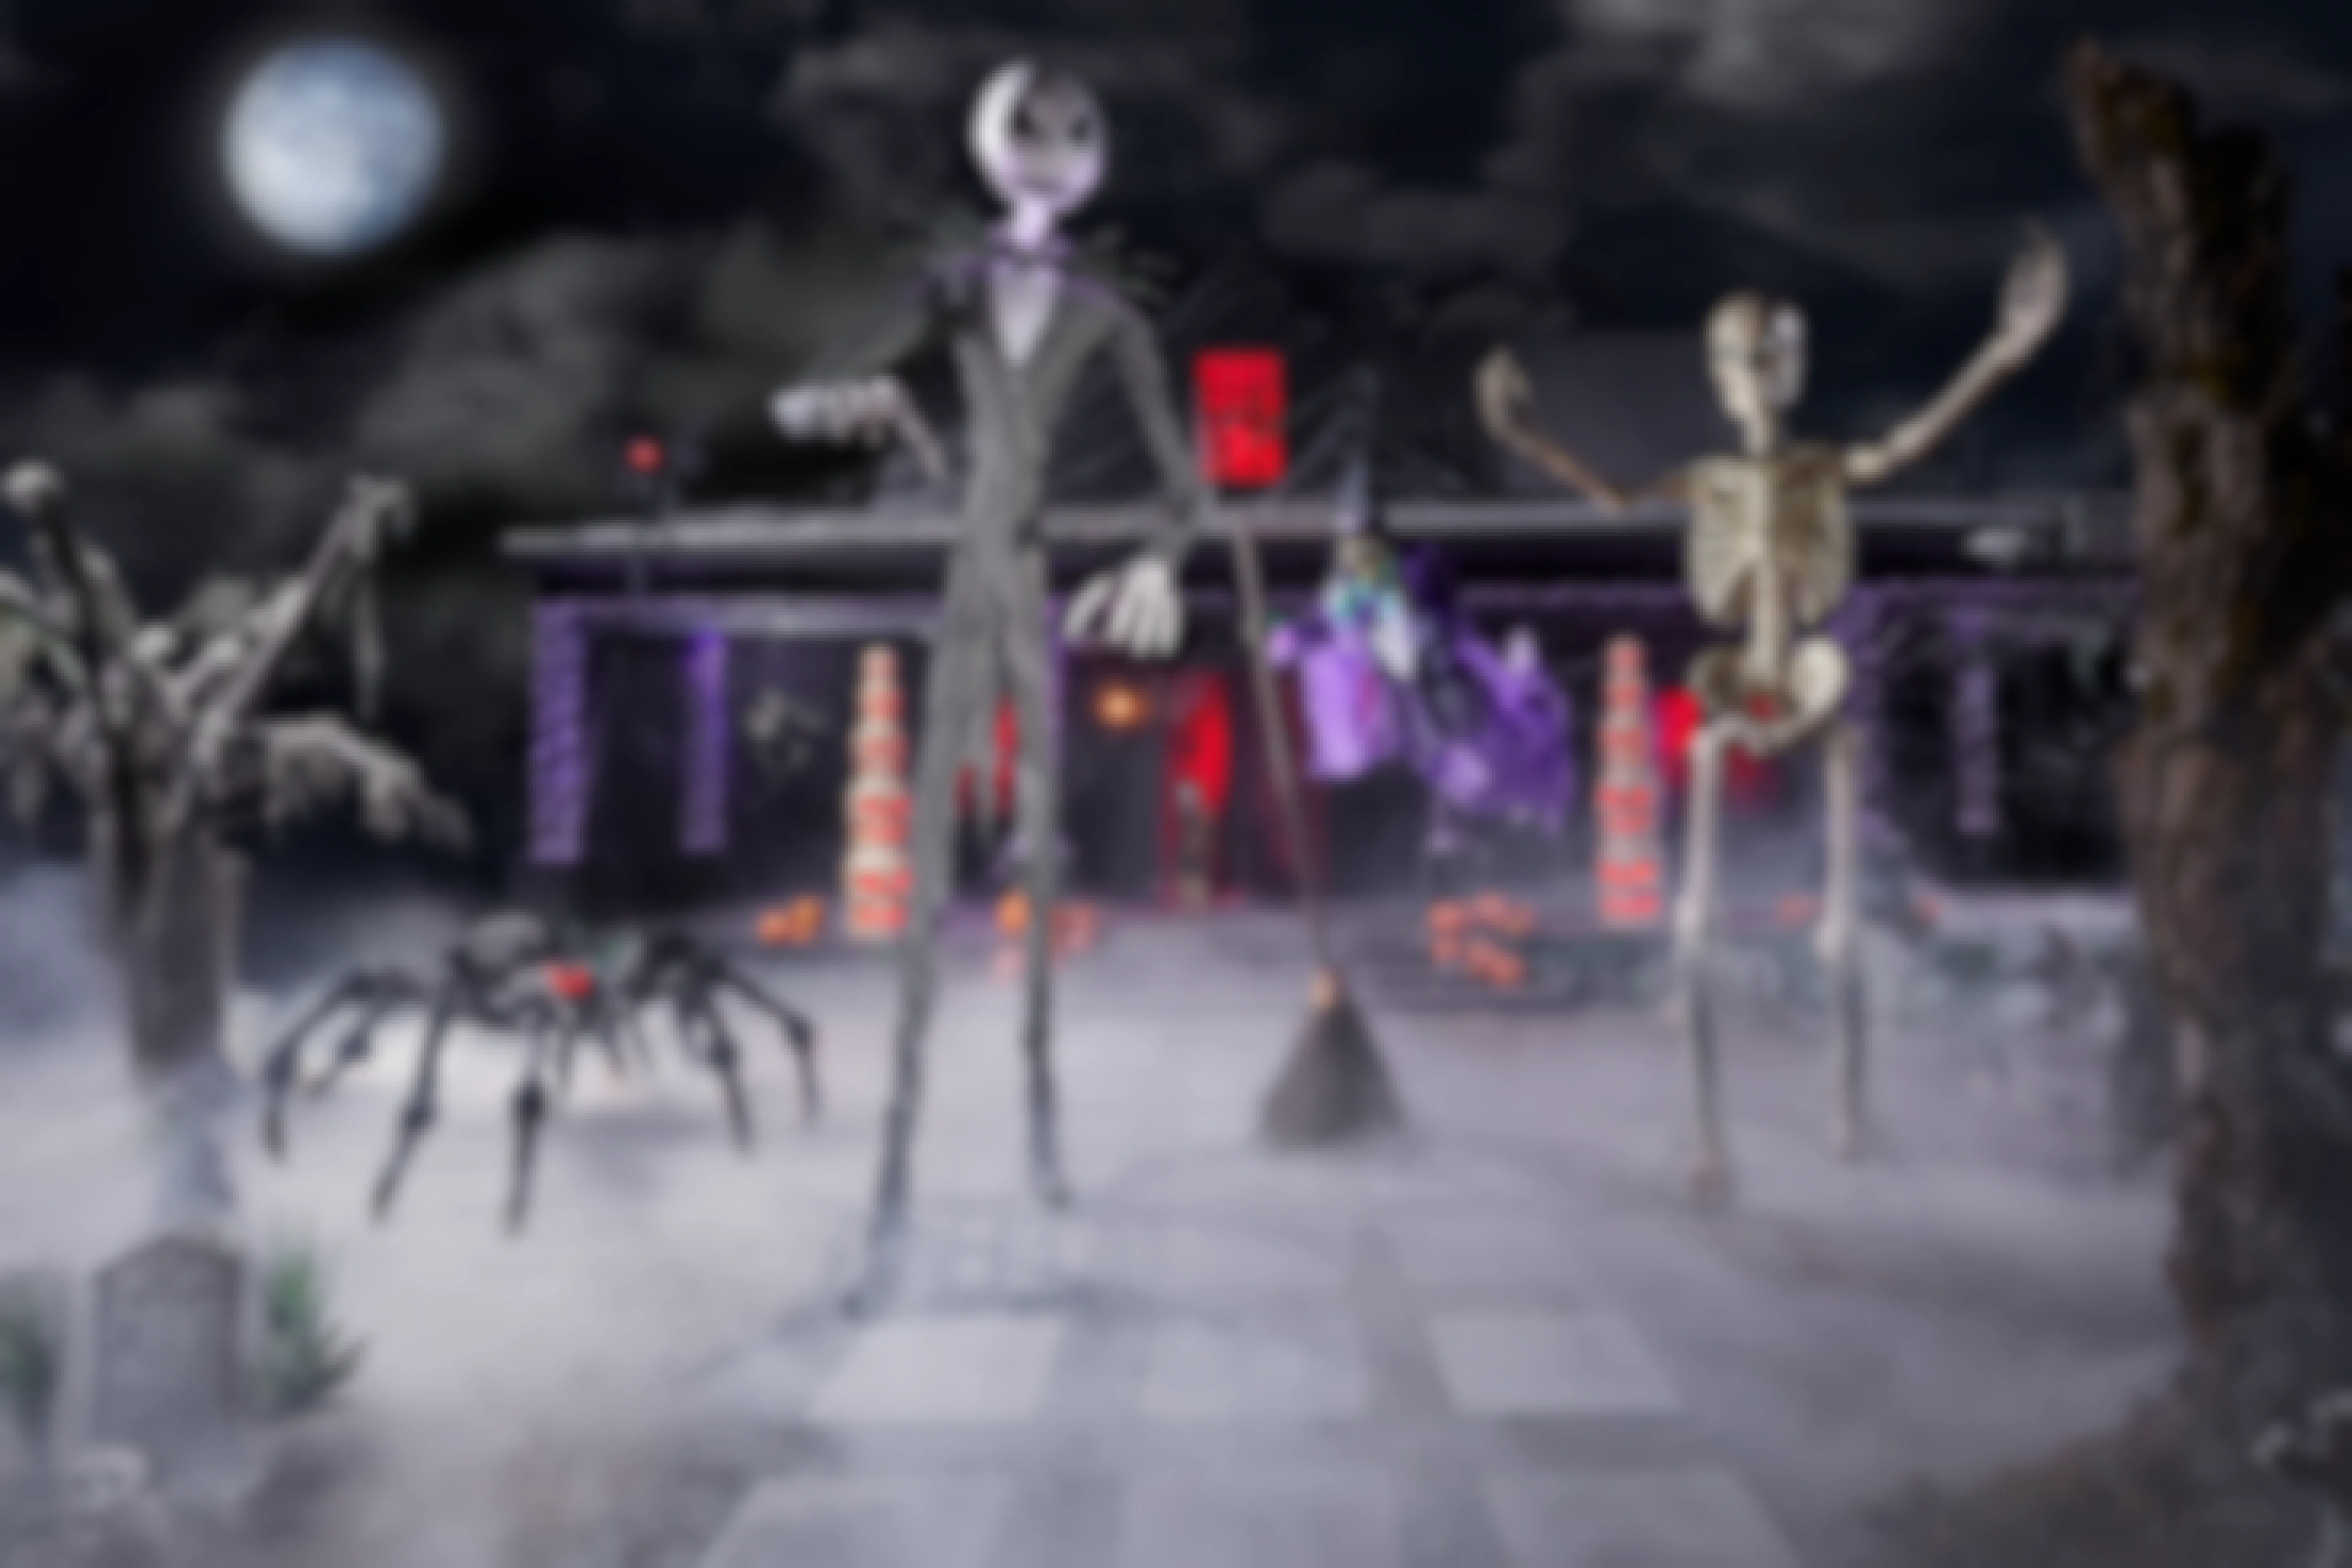 Jack Skellington and other Halloween decor in a foggy setting.